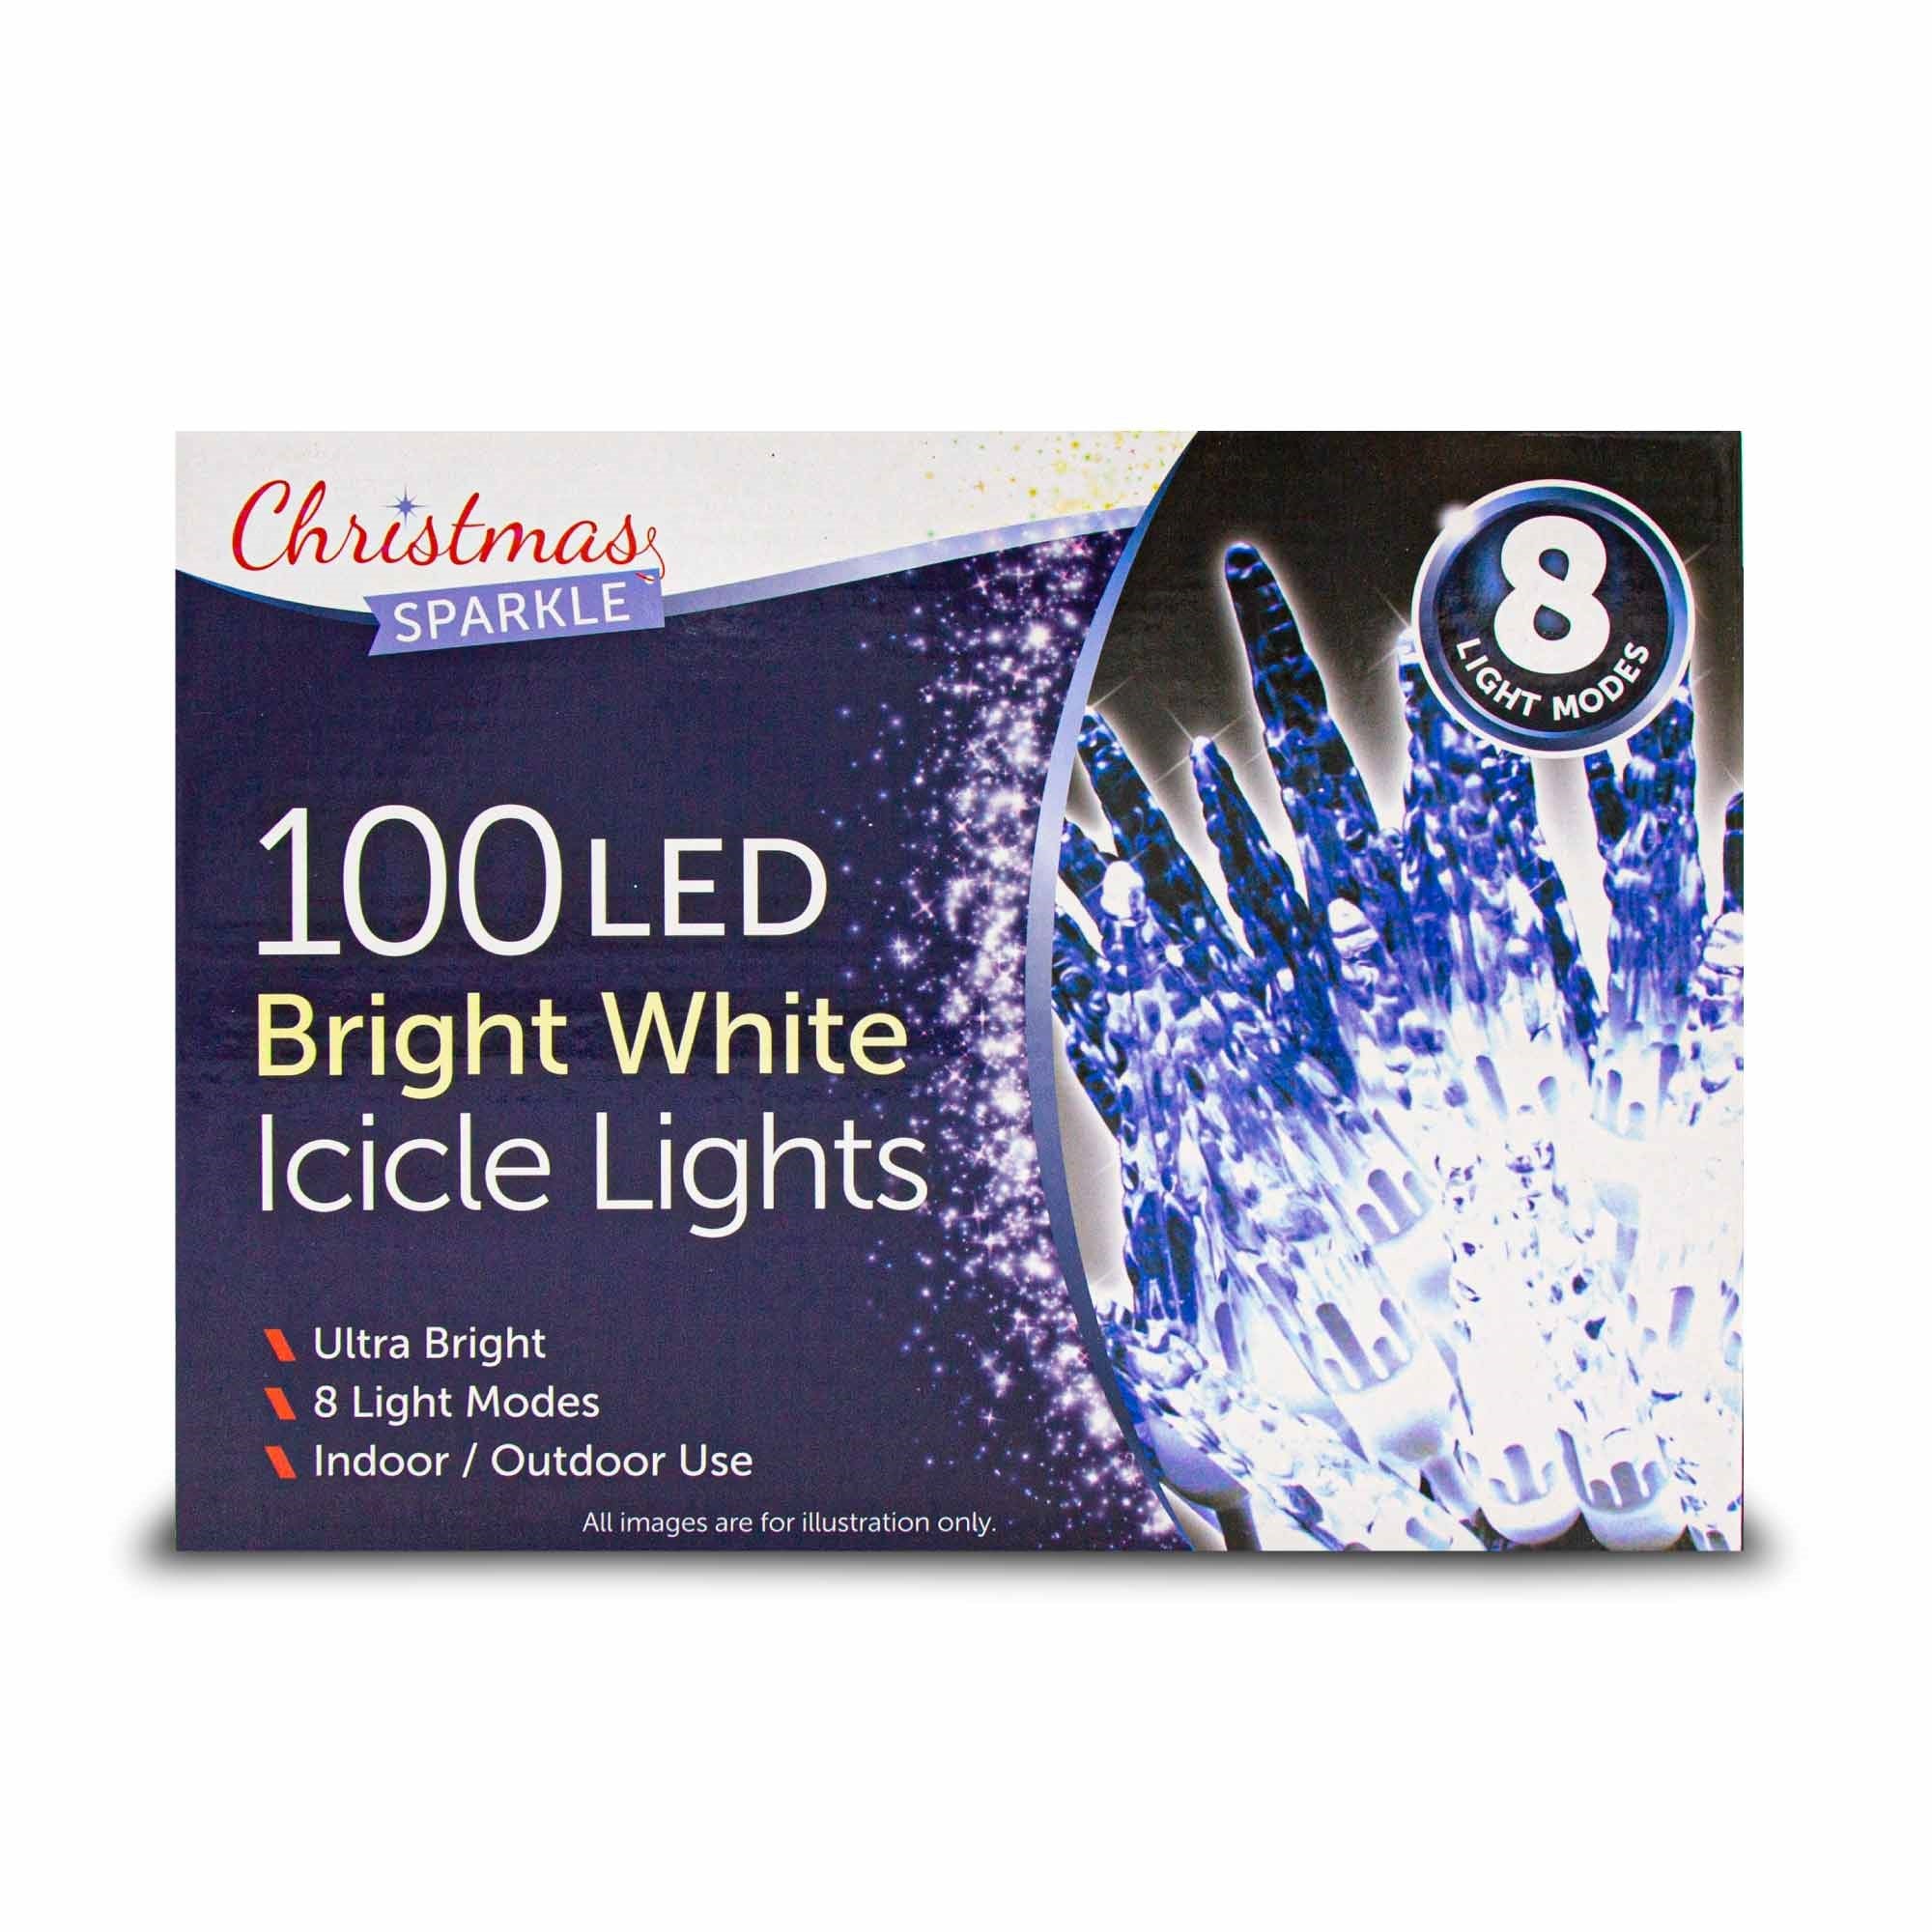 Christmas Sparkle Icicle Sculpture Lights x 100 Bright White LEDs - Mains Powered  | TJ Hughes